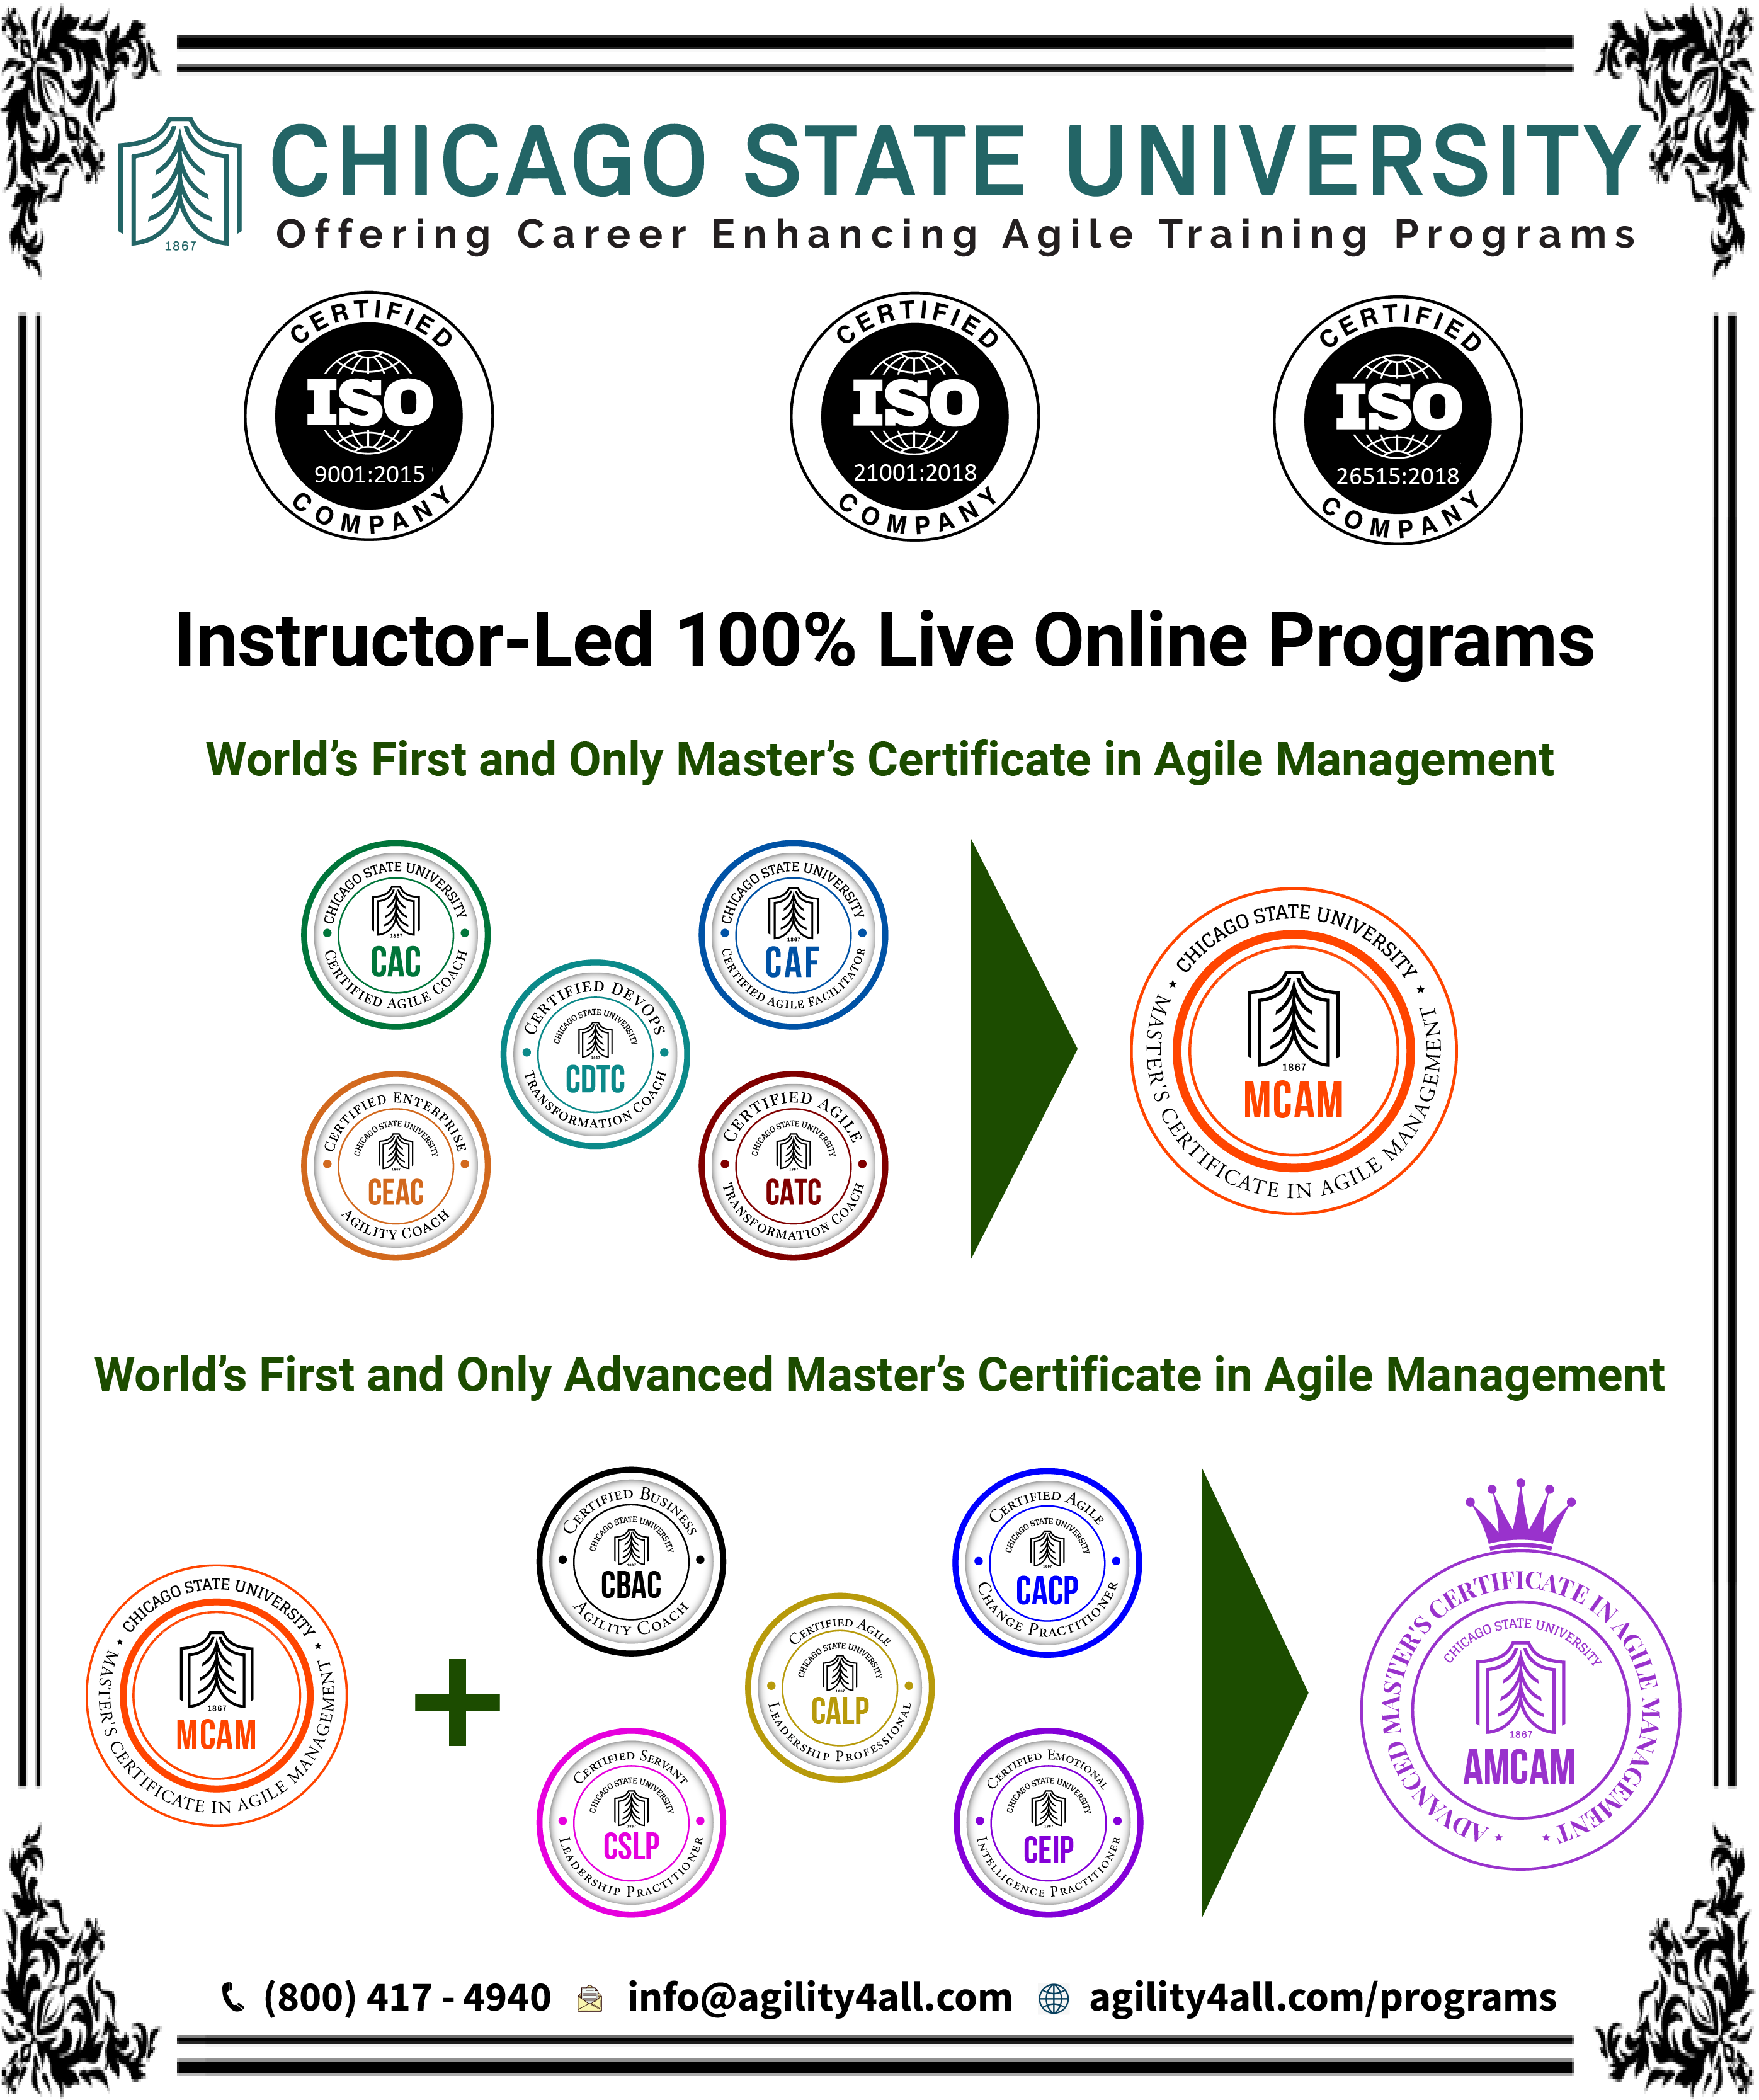 Agile Training Programs from Chicago State University